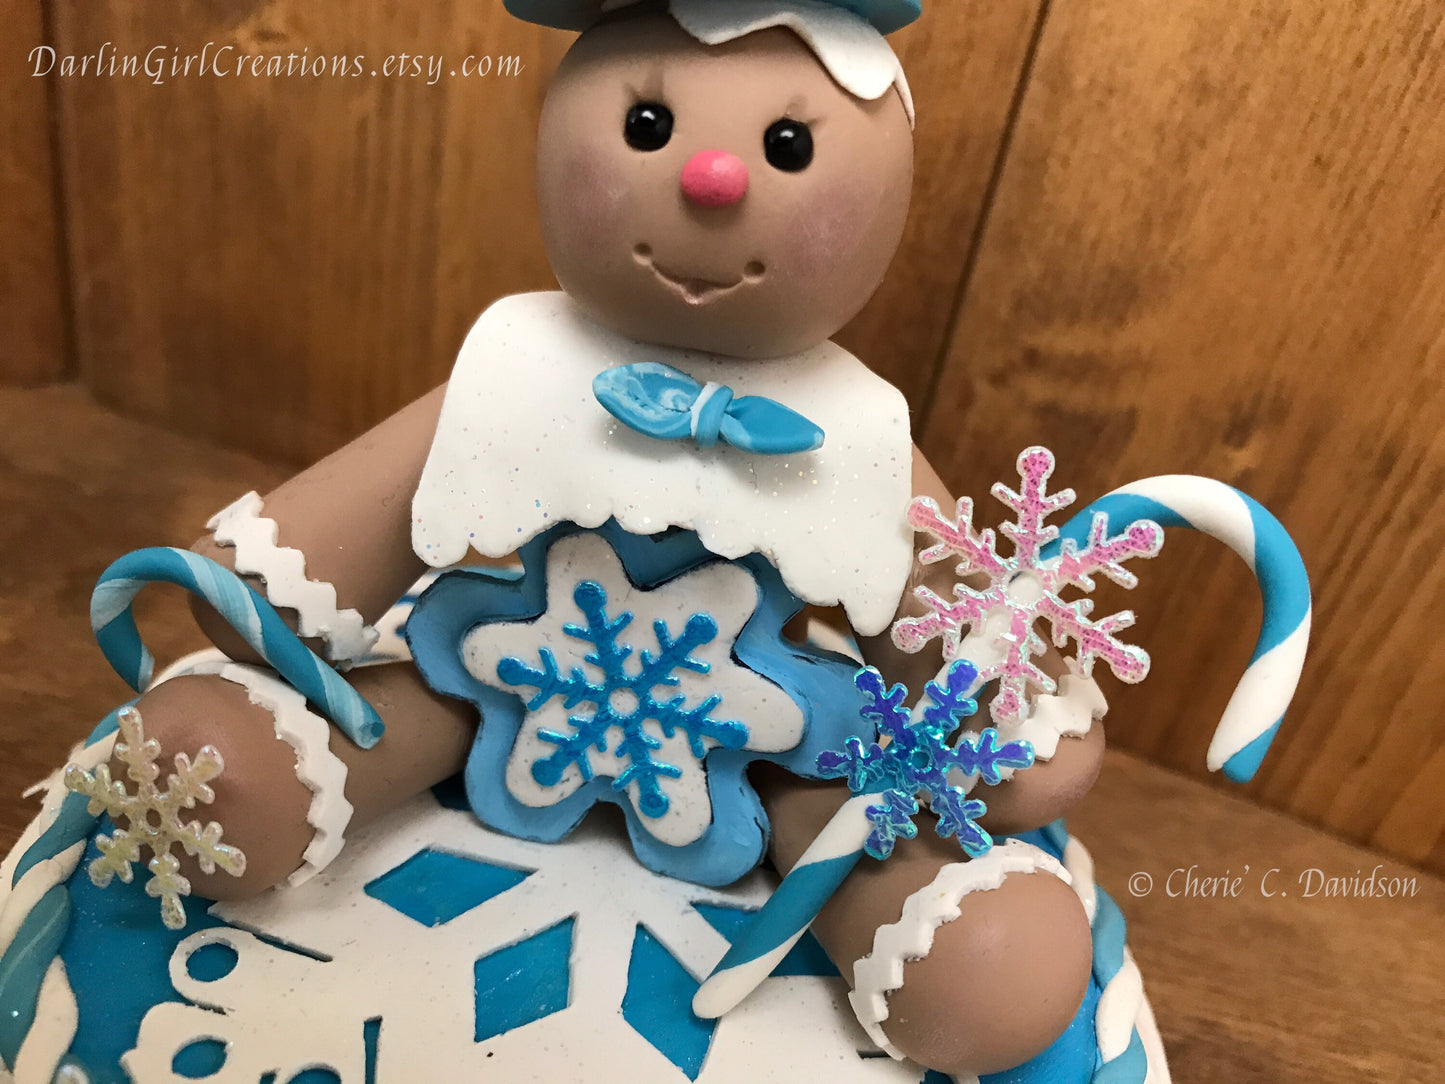 Winter Wonderland Holiday Gingy Adorable Clay Gingerbread Figure with Sparkling Snowflakes, Blue Candy Canes, Snow & Smiles